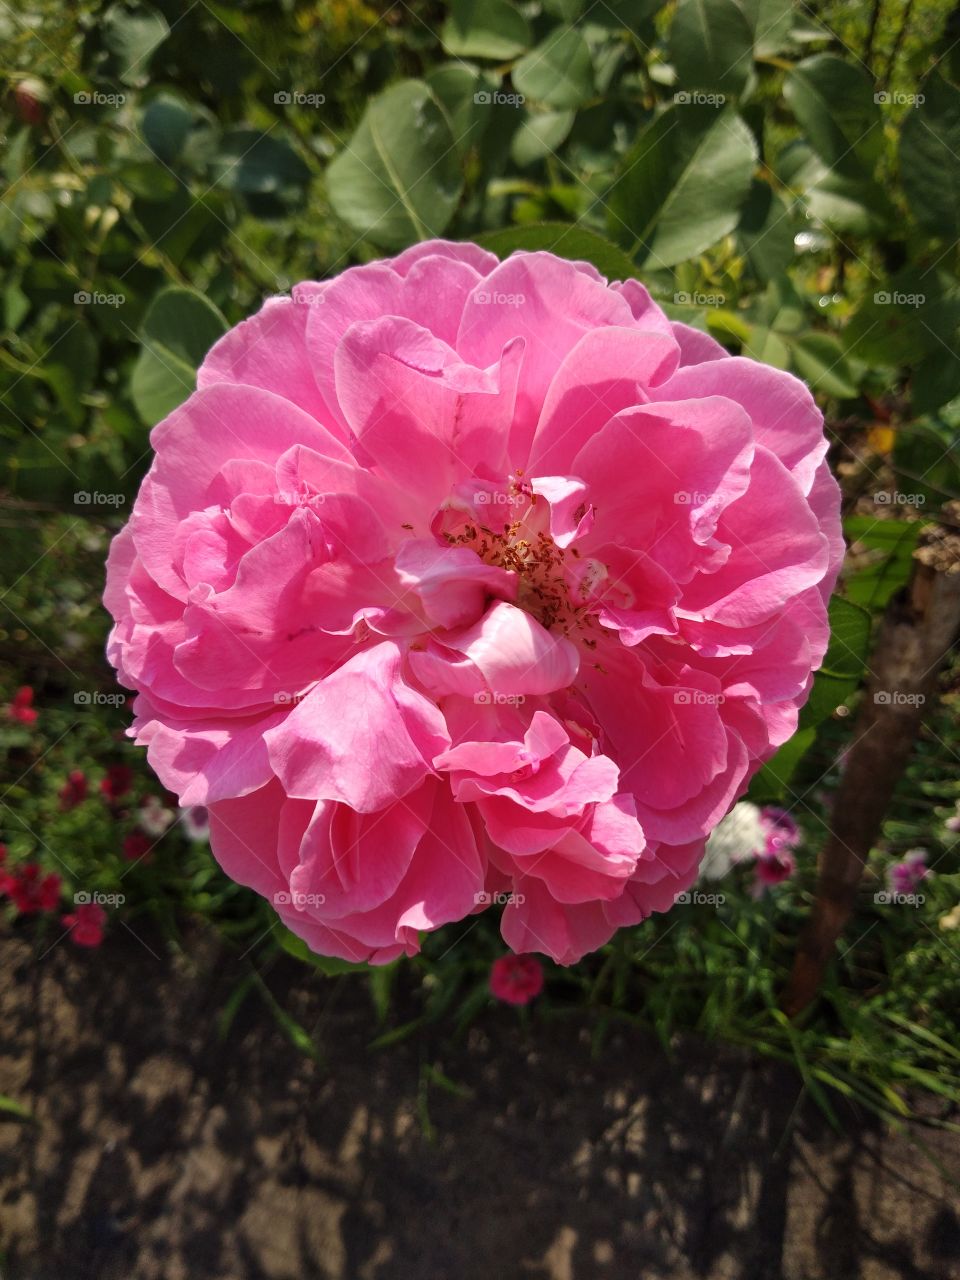 Close up of pink rose that are fully blooming in the garden.